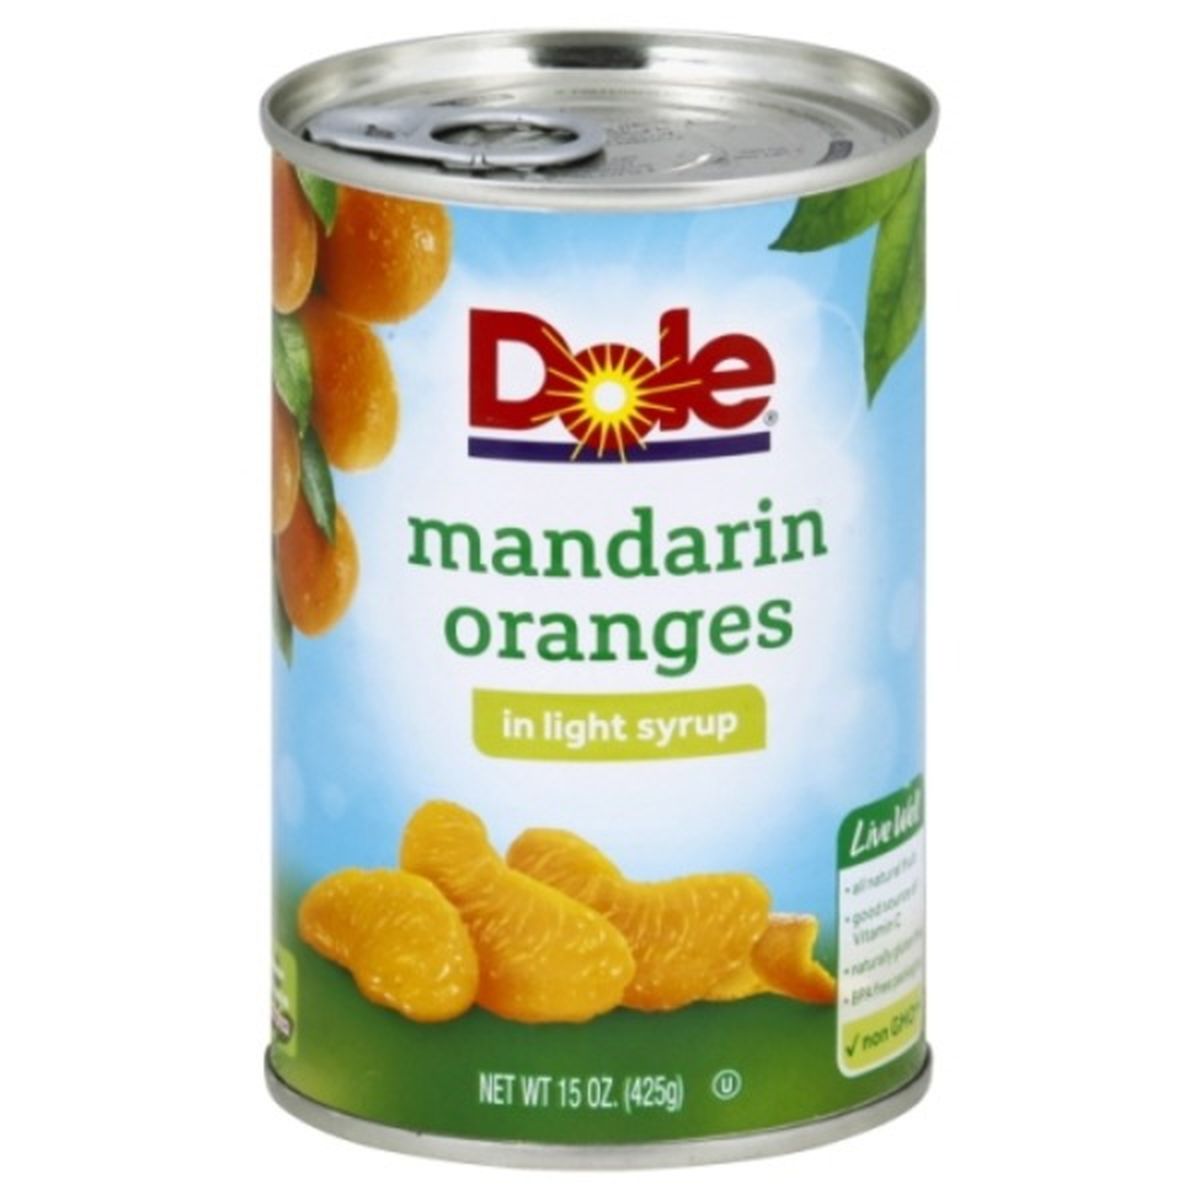 Calories in Dole Mandarin Oranges, in Light Syrup